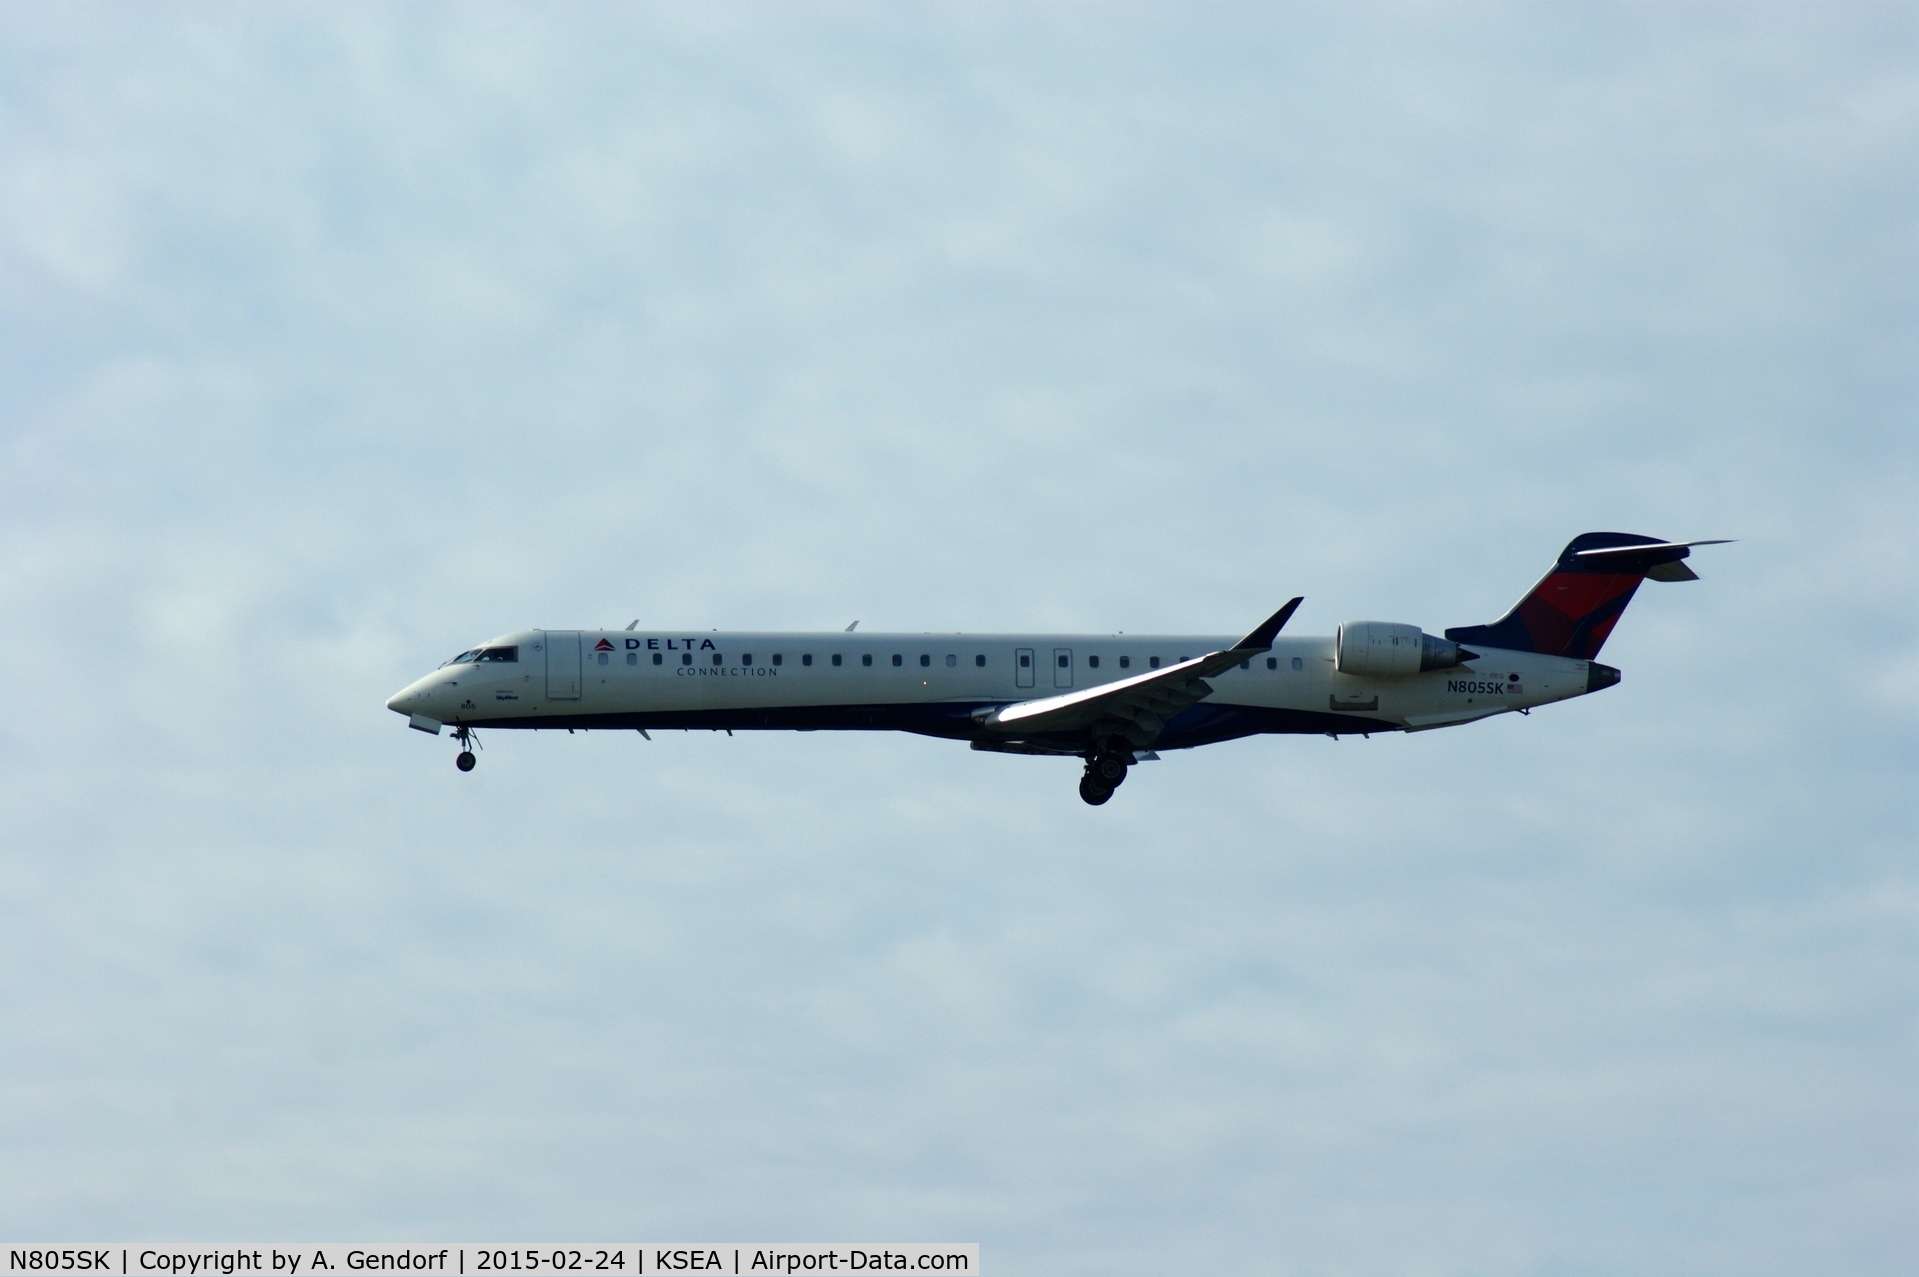 N805SK, 2006 Bombardier CRJ-900ER (CL-600-2D24) C/N 15069, Sky West, Delta Connection cs., is here on short finals RWY16C at Seattle-Tacoma Intl.(KSEA)